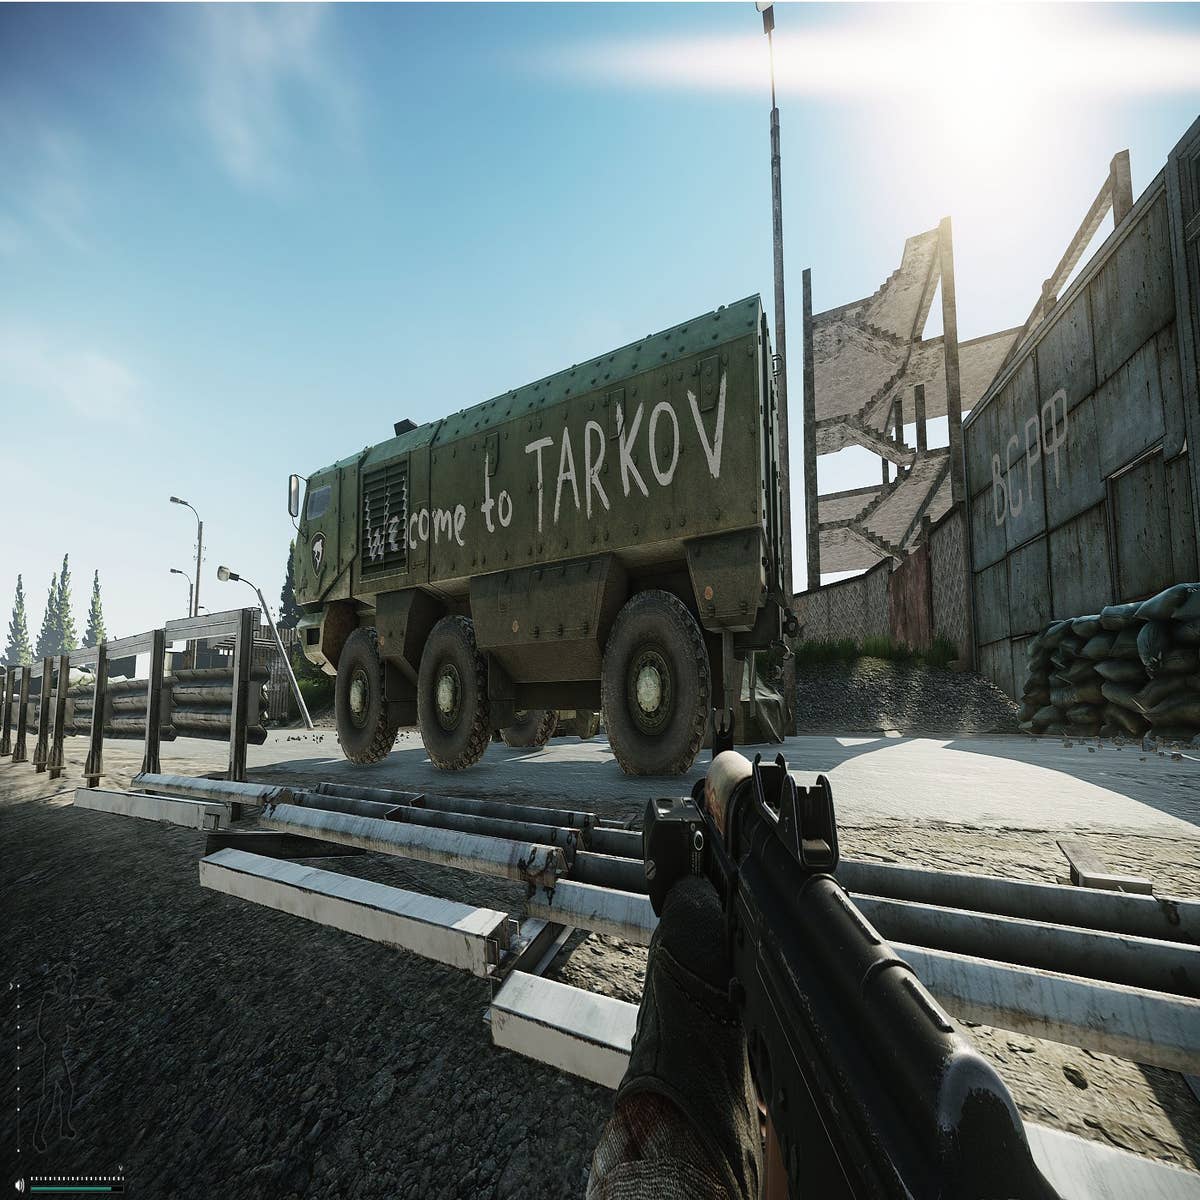 Doing Quests!, Escape from Tarkov